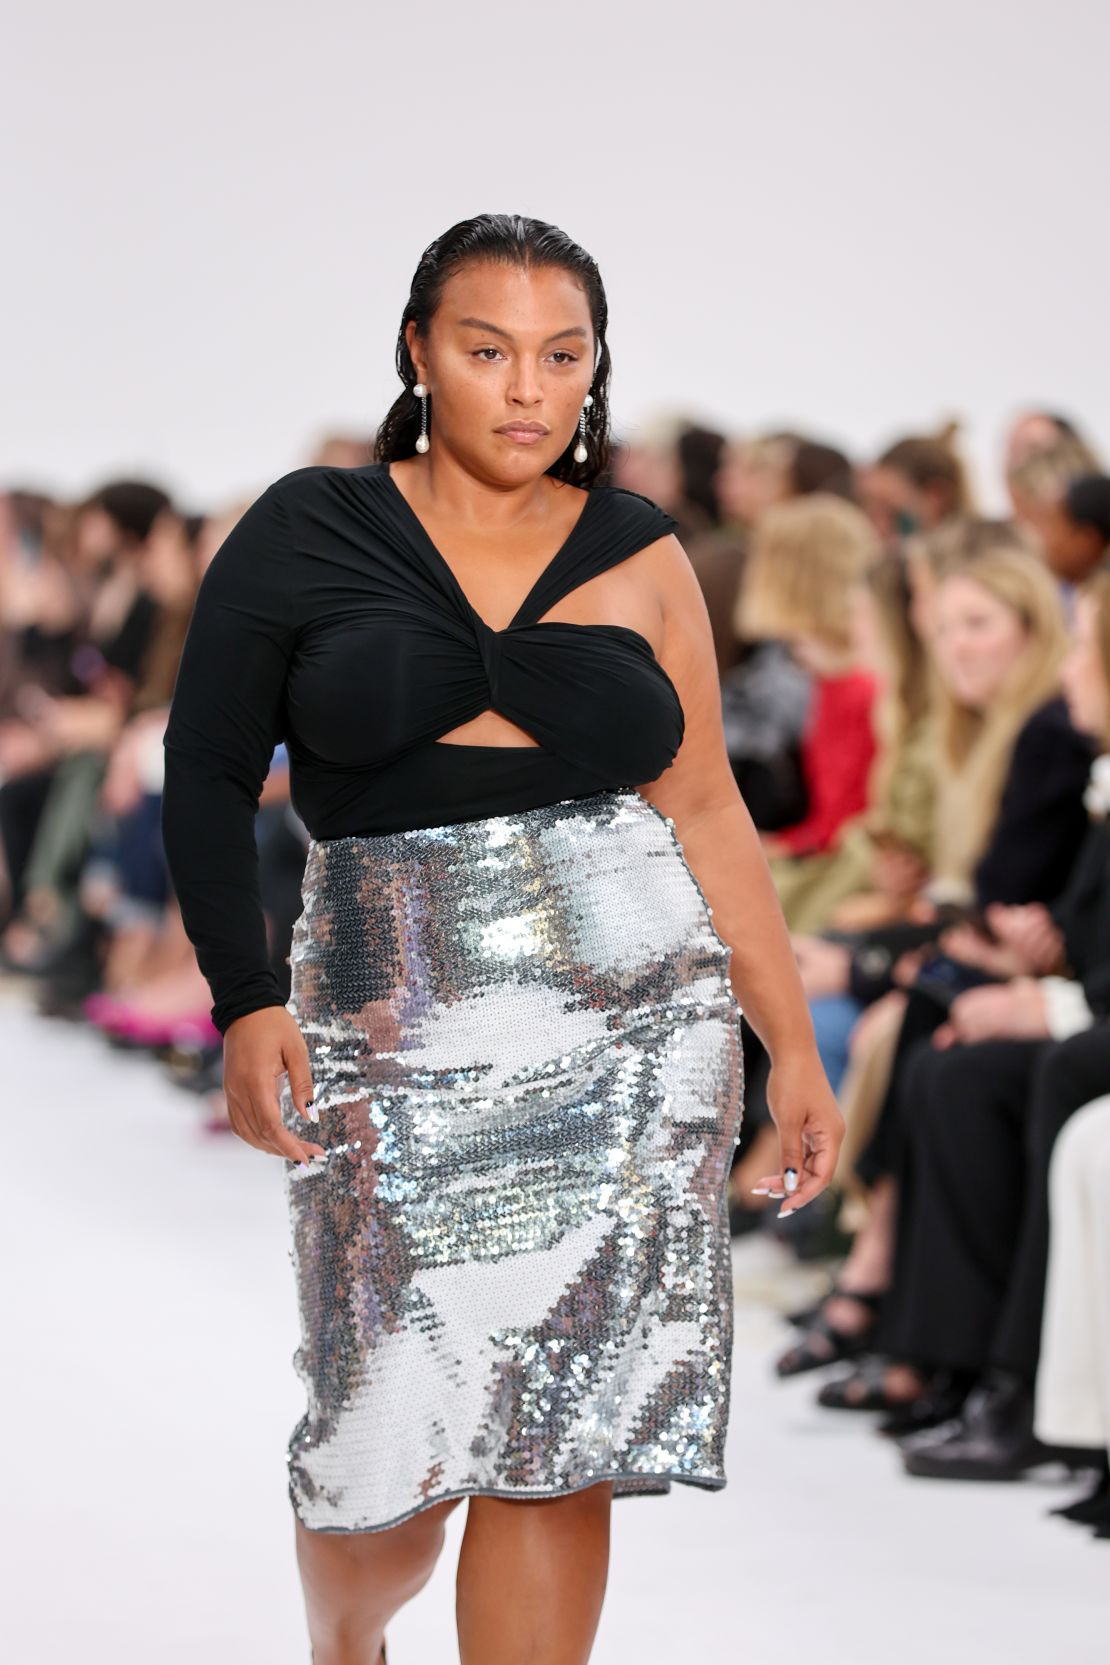 Paloma Elsesser: The model who overcame otherness